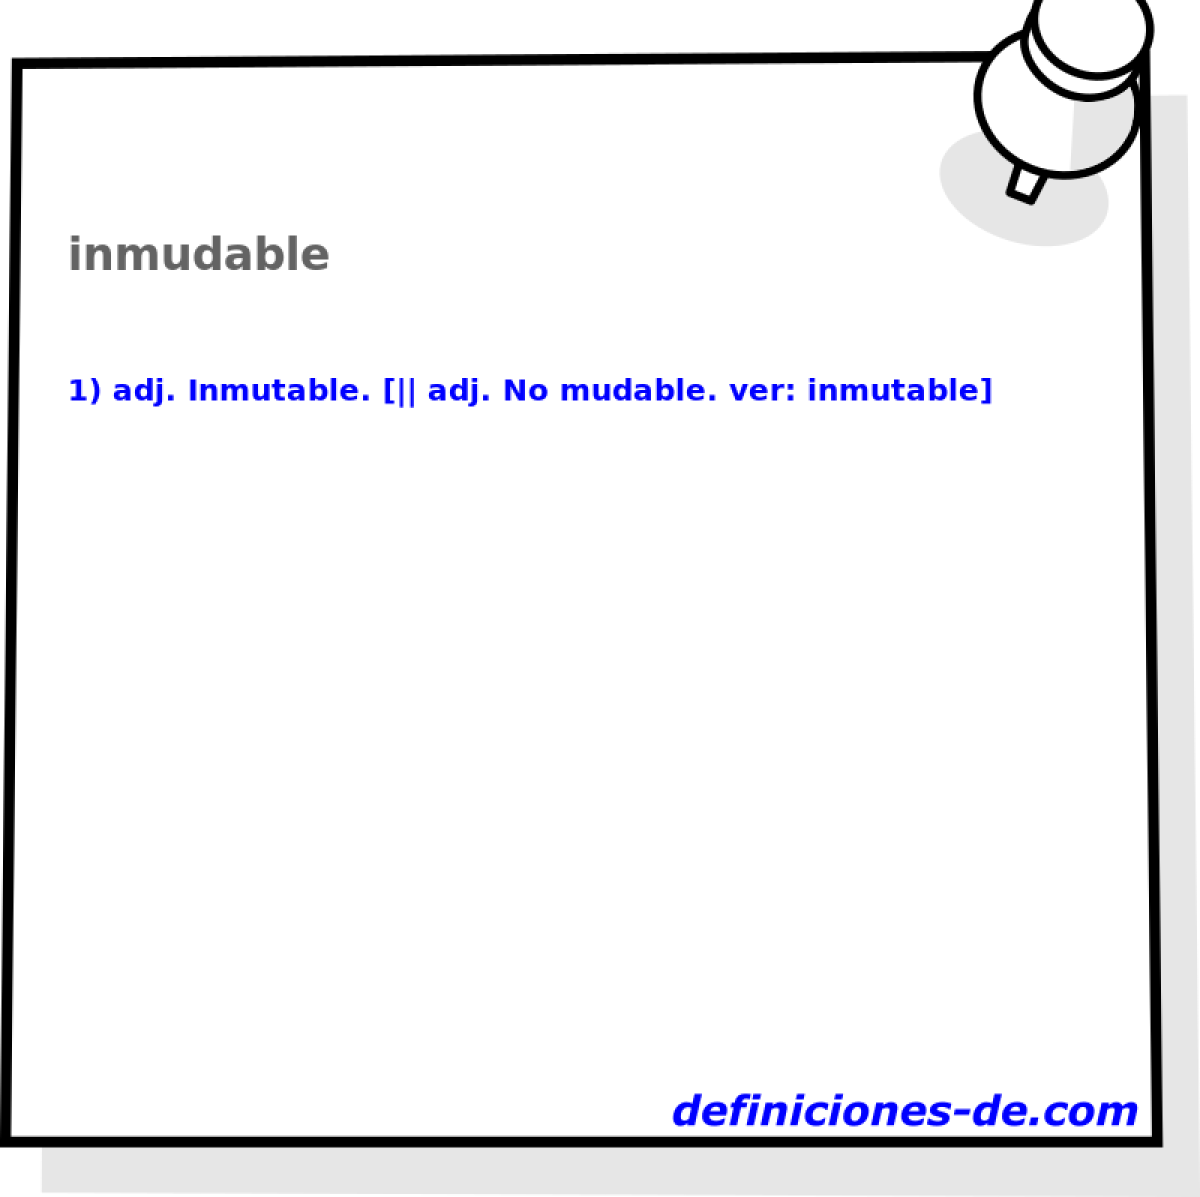 inmudable 